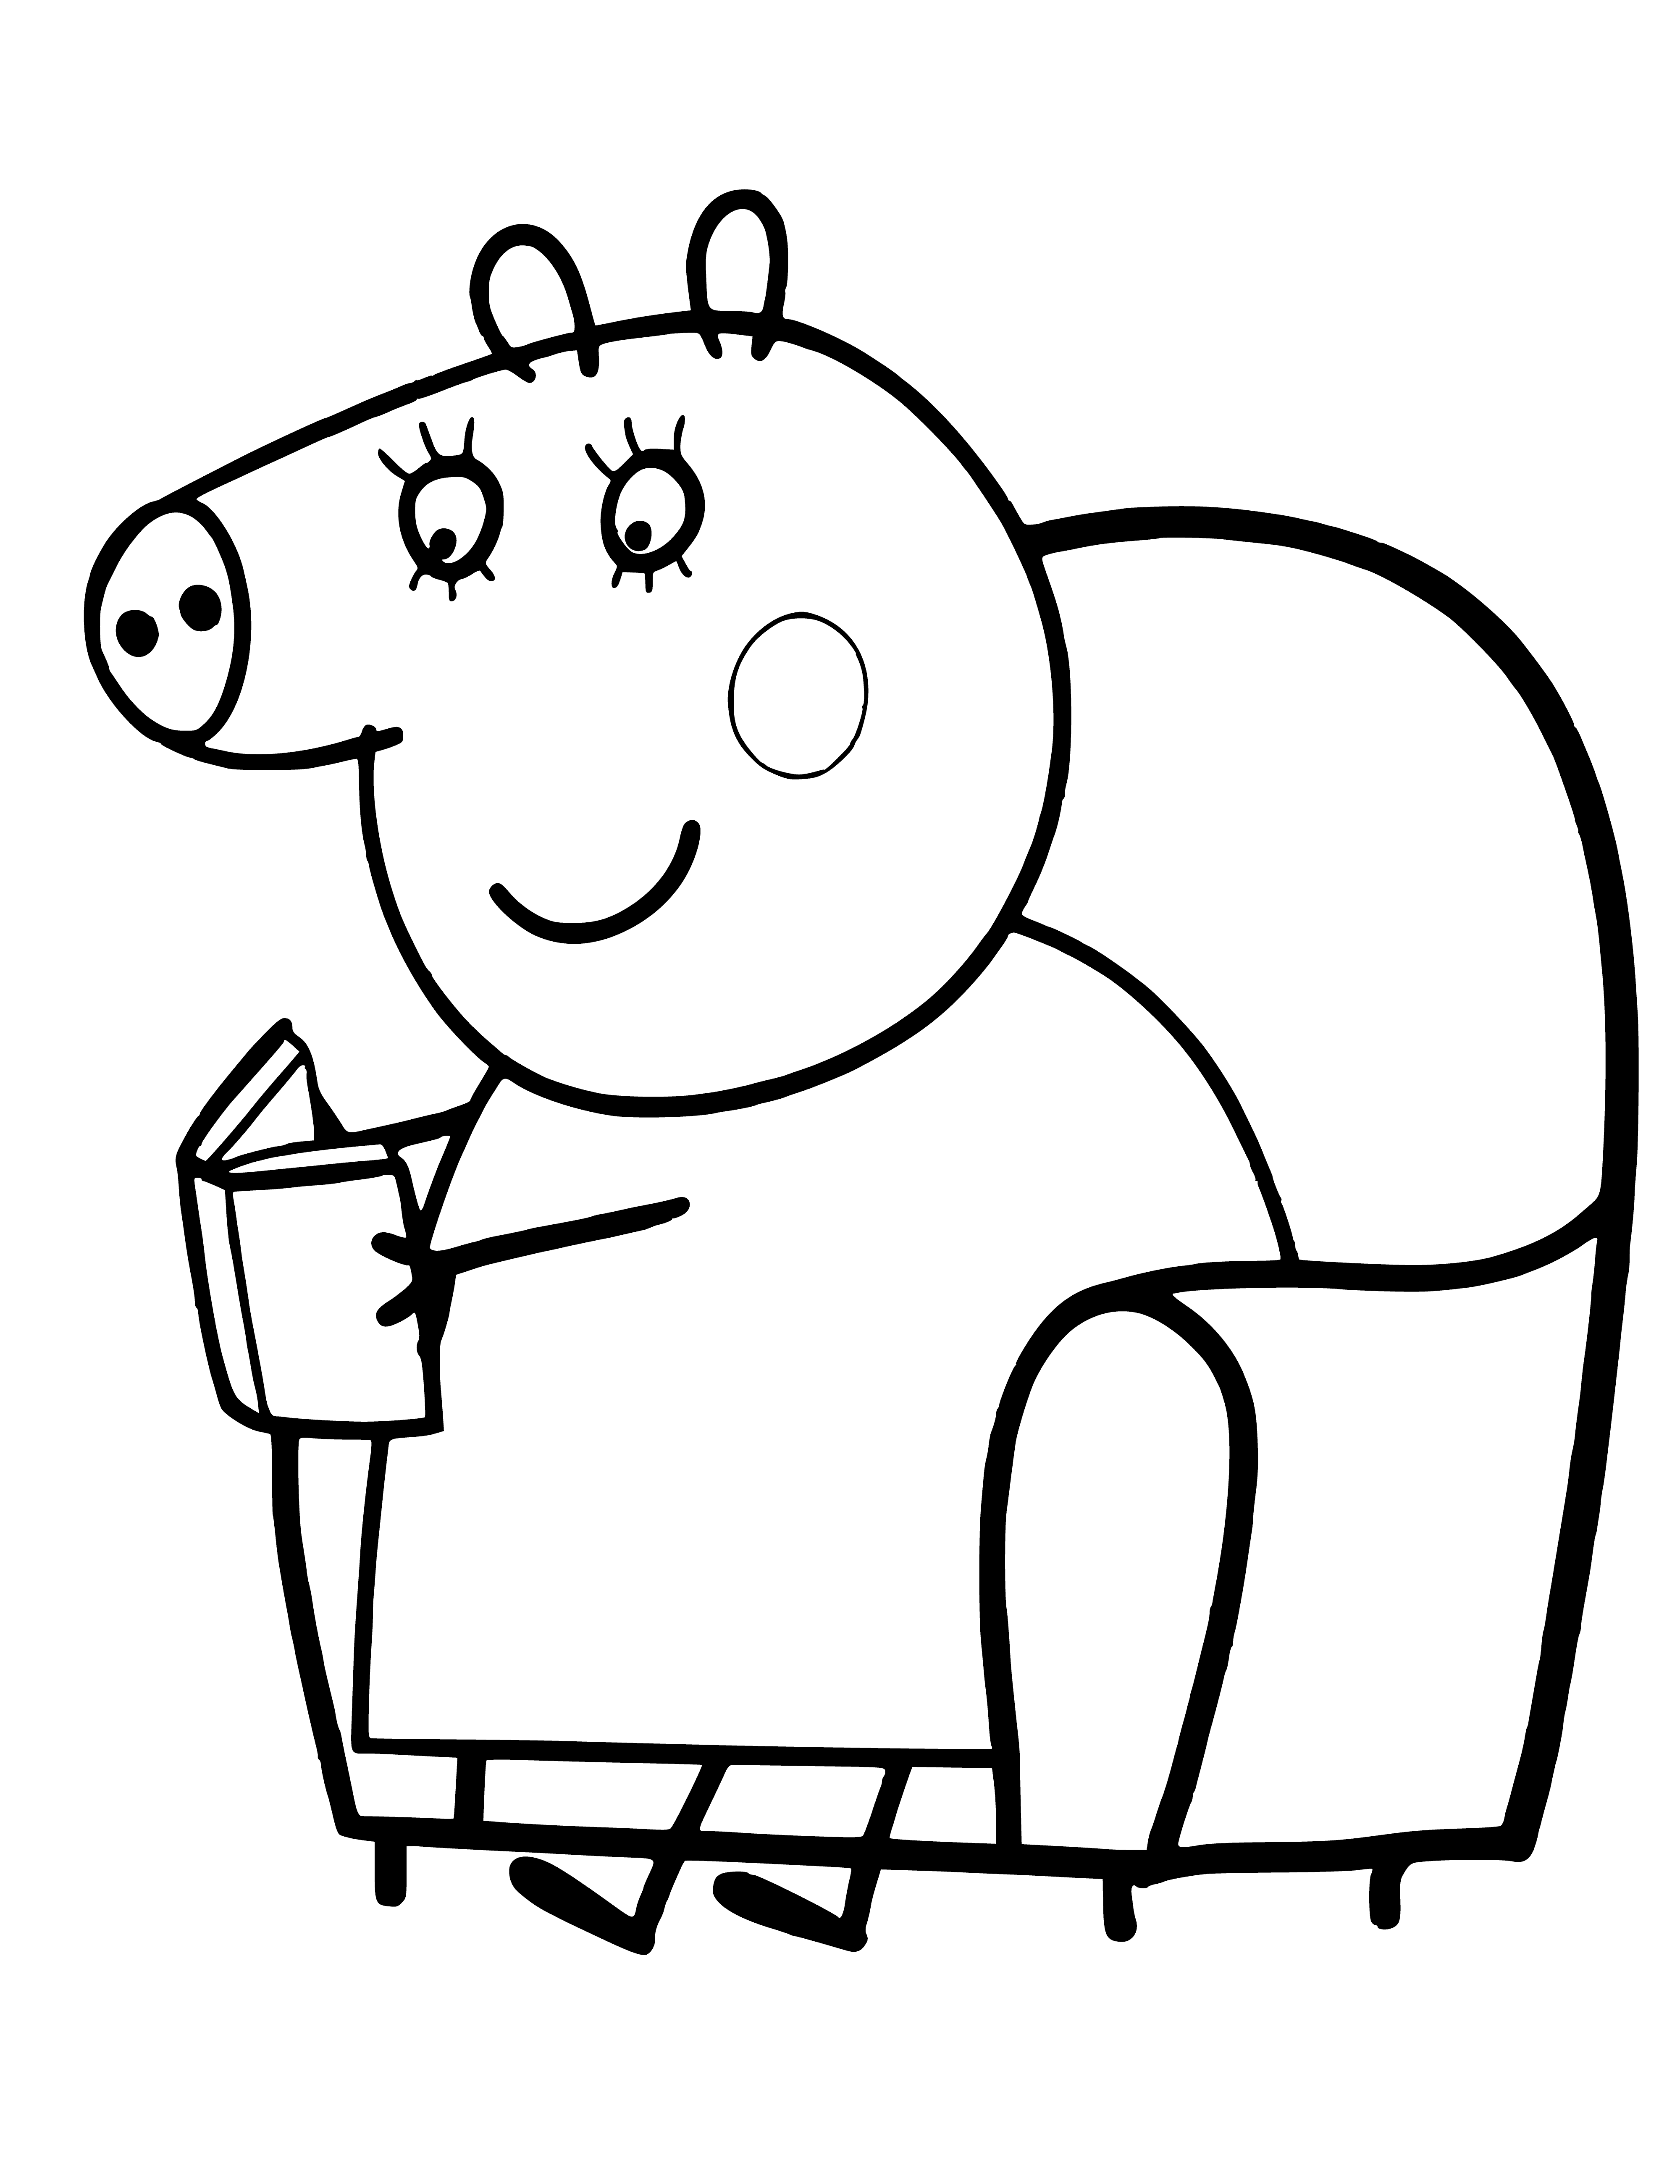 Mom Pig in a chair coloring page